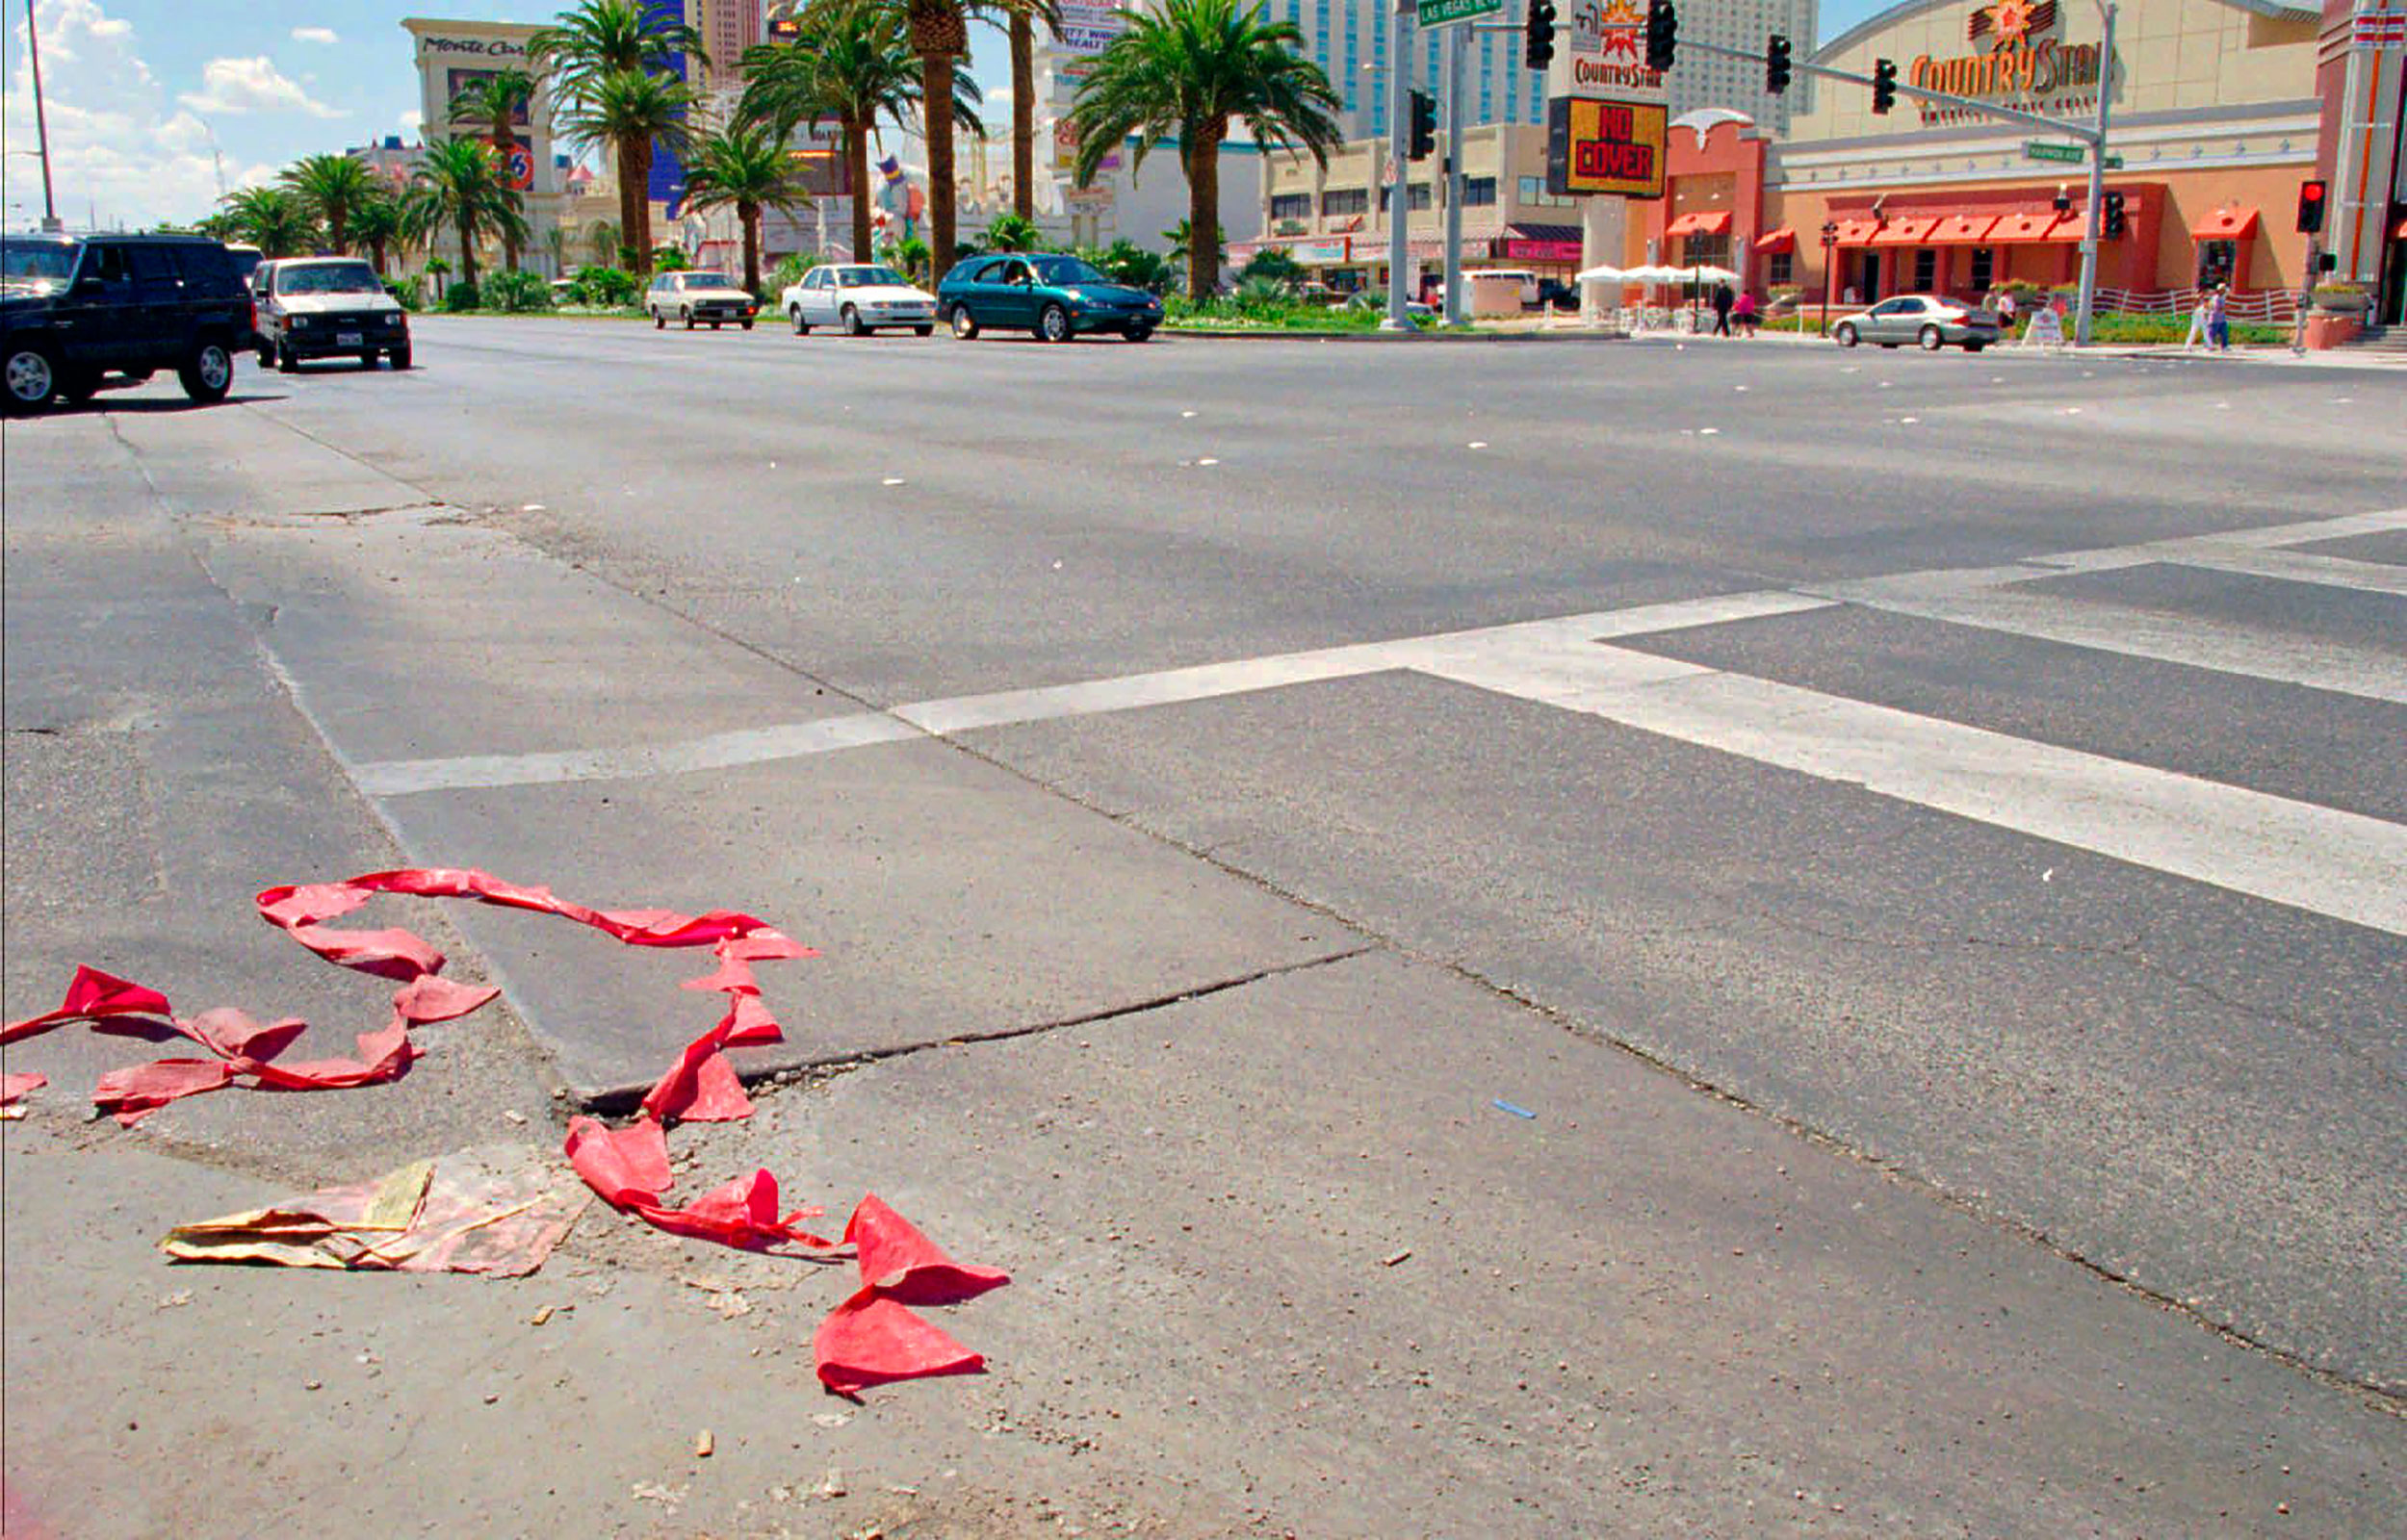 The intersection in Las Vegas where Tupac Shakur was shot in September 1996.